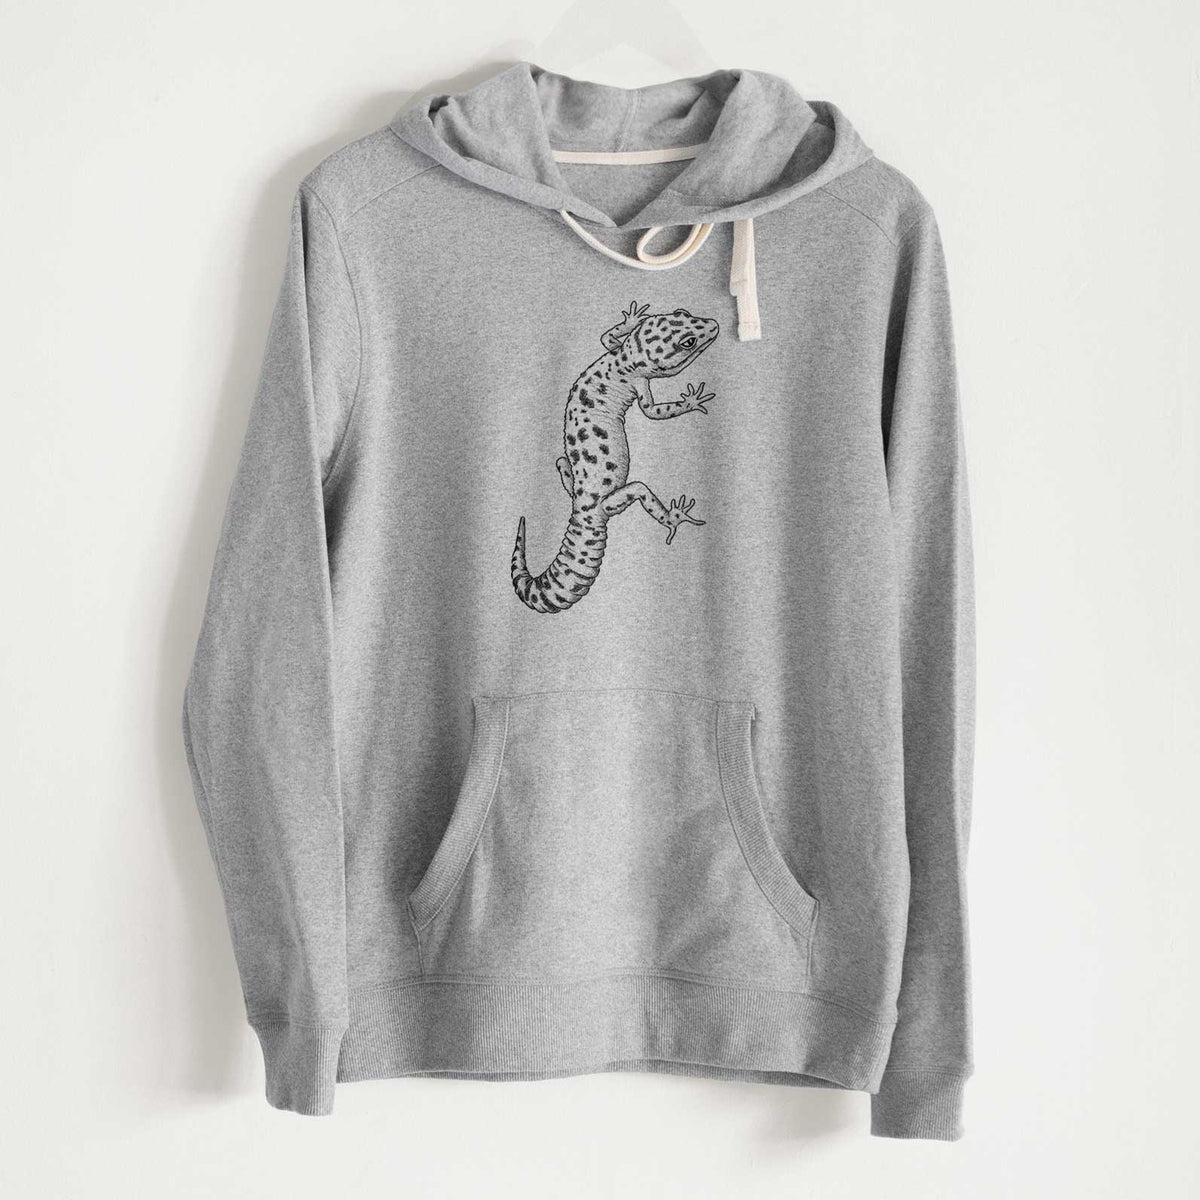 Eublepharis macularius - Leopard Gecko - Unisex Recycled Hoodie - CLOSEOUT - FINAL SALE